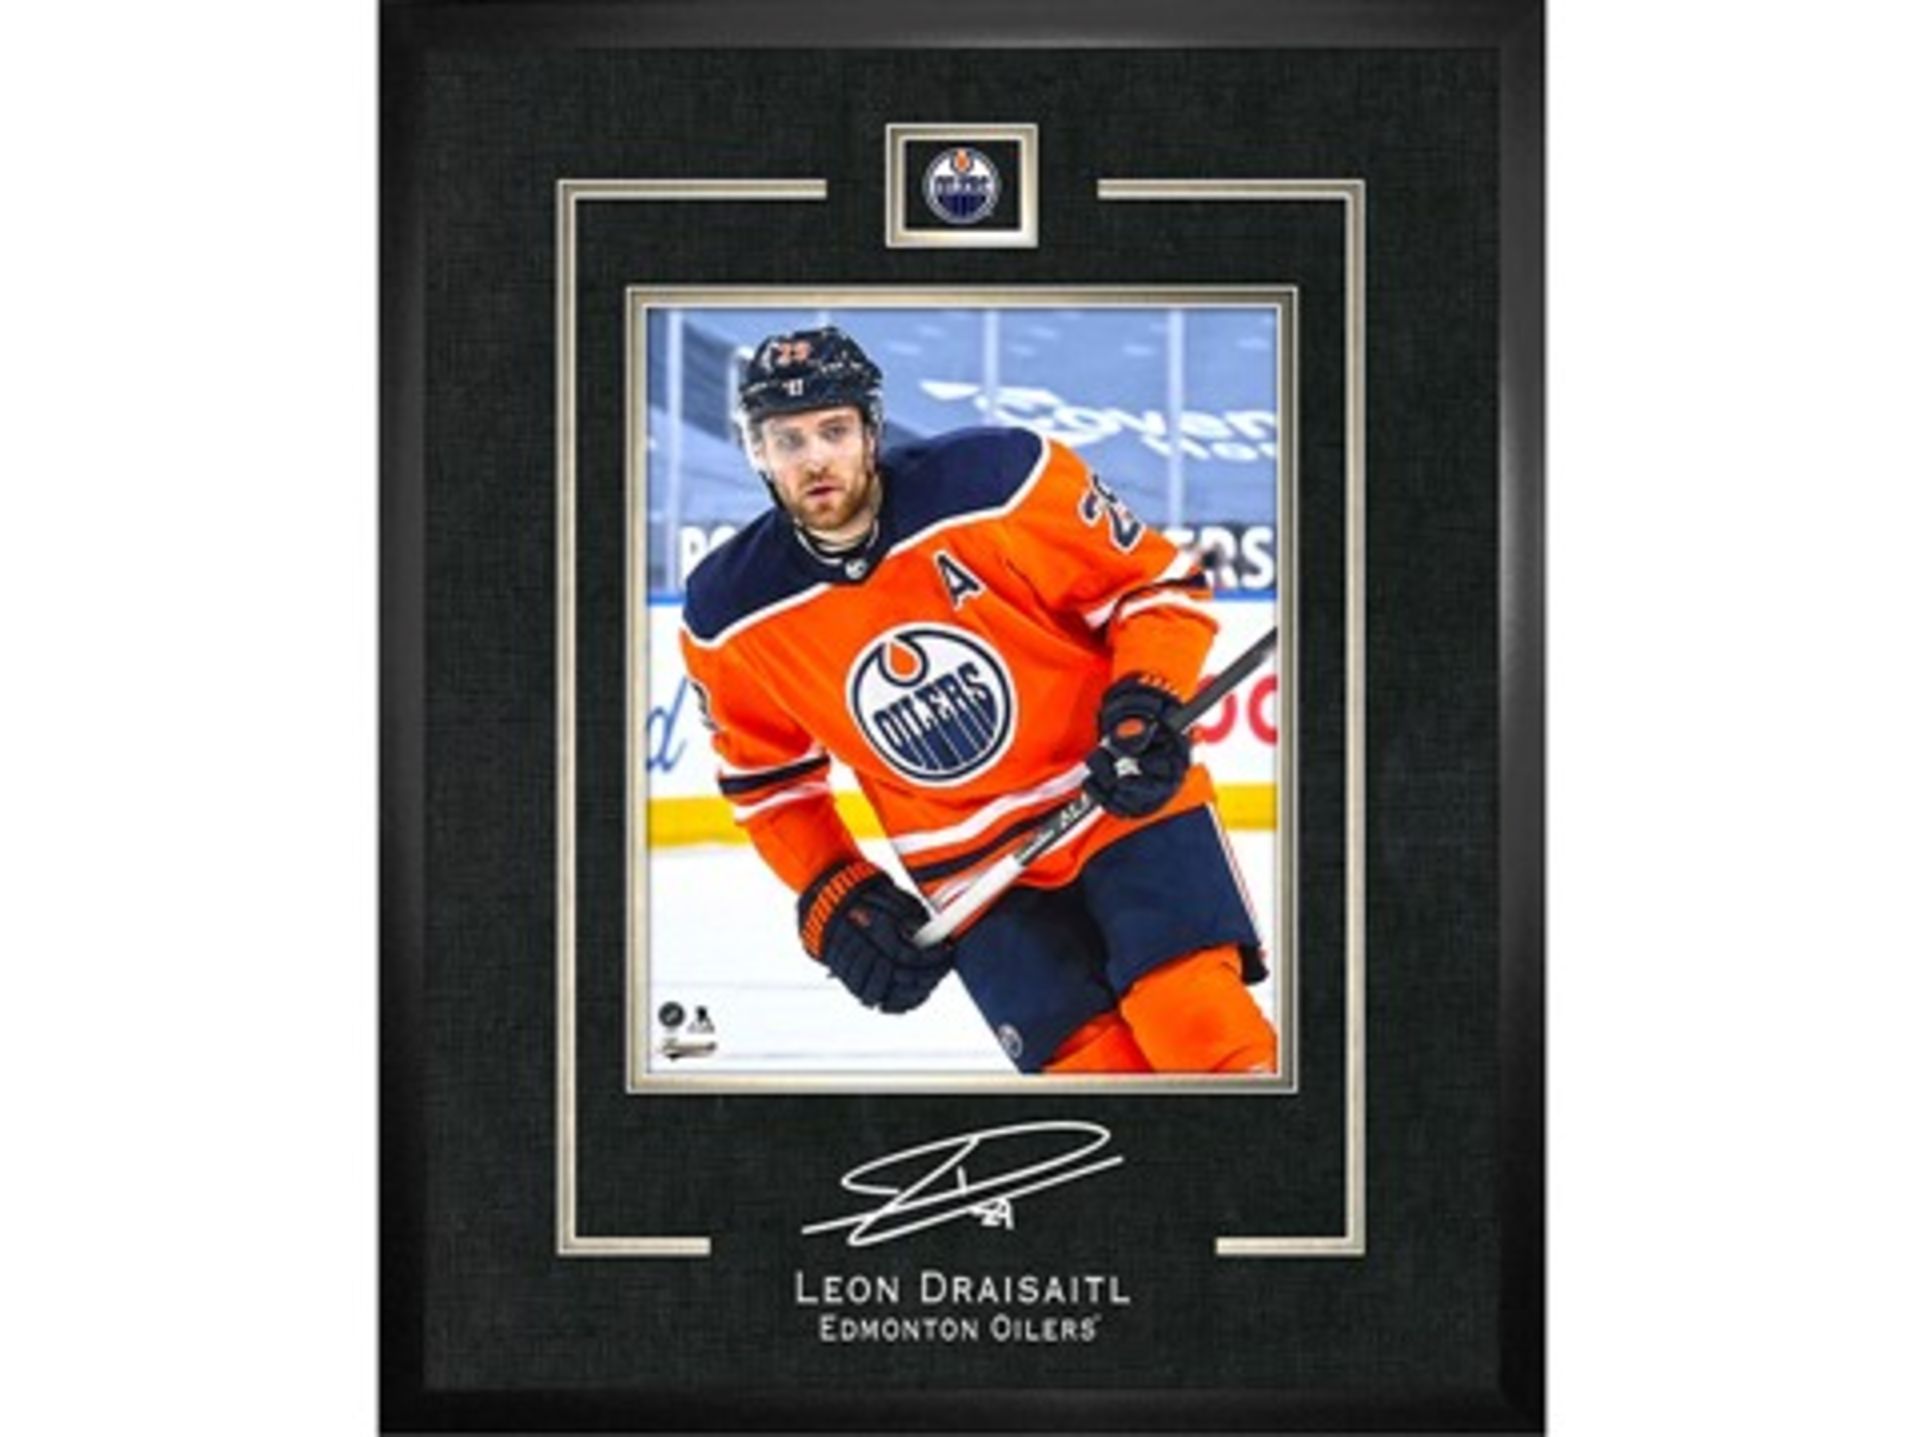 Leon Draisaitl framed action shot w/ replica signature - Retail Value: $200 - Donated By: